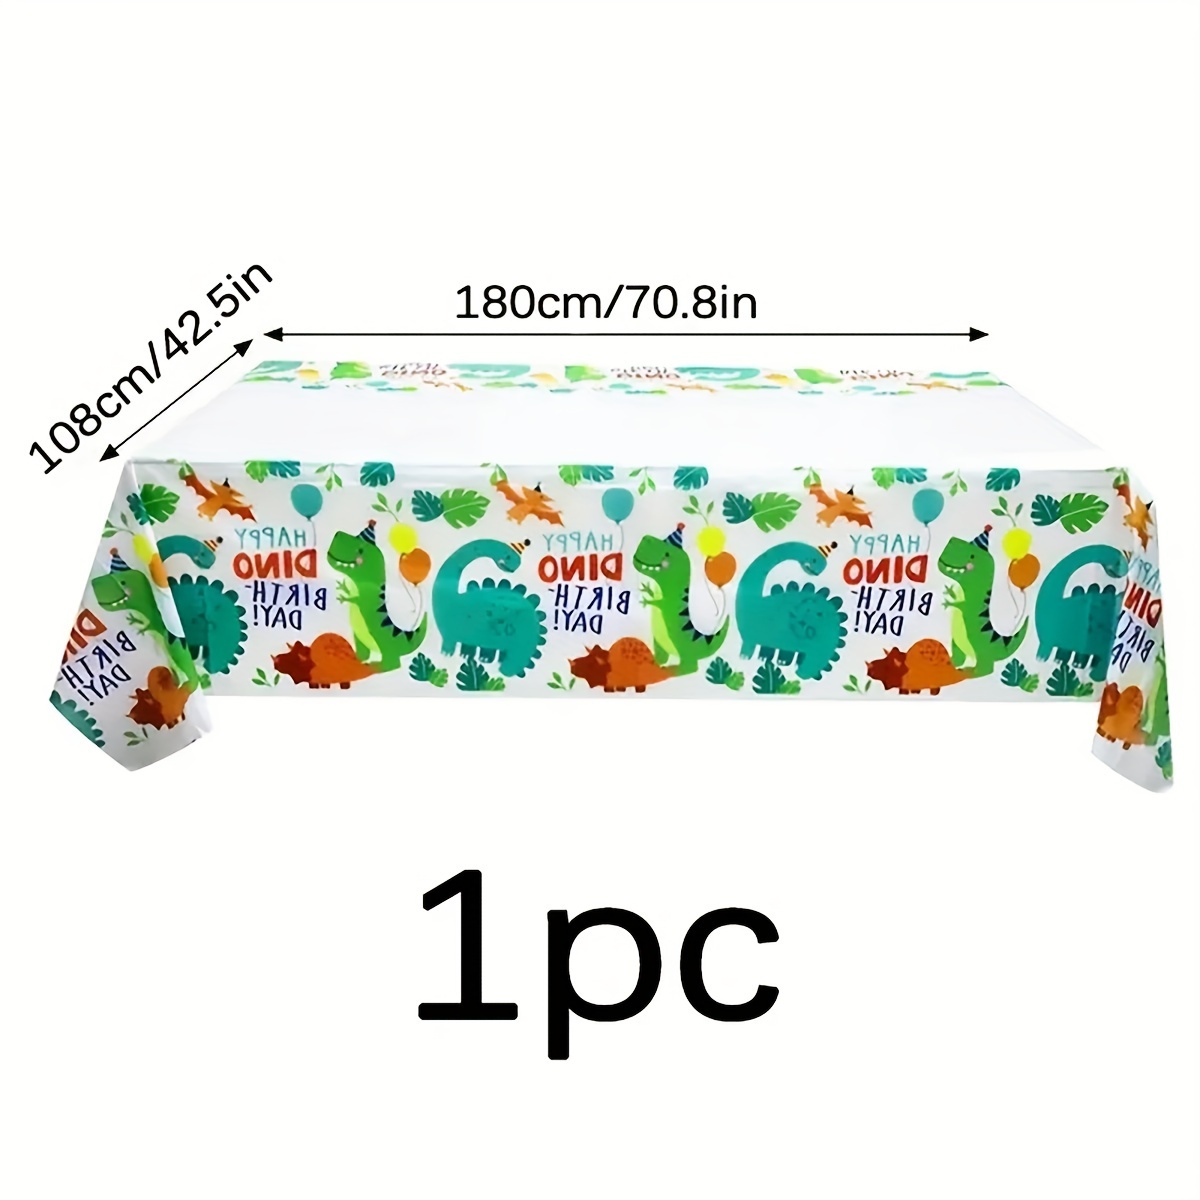 

1pc, Dinosaur Party Tablecloth, Plastic, Colorful Dino Birthday Party Theme Table Cover, Birthday Baby Shower Party Decorations